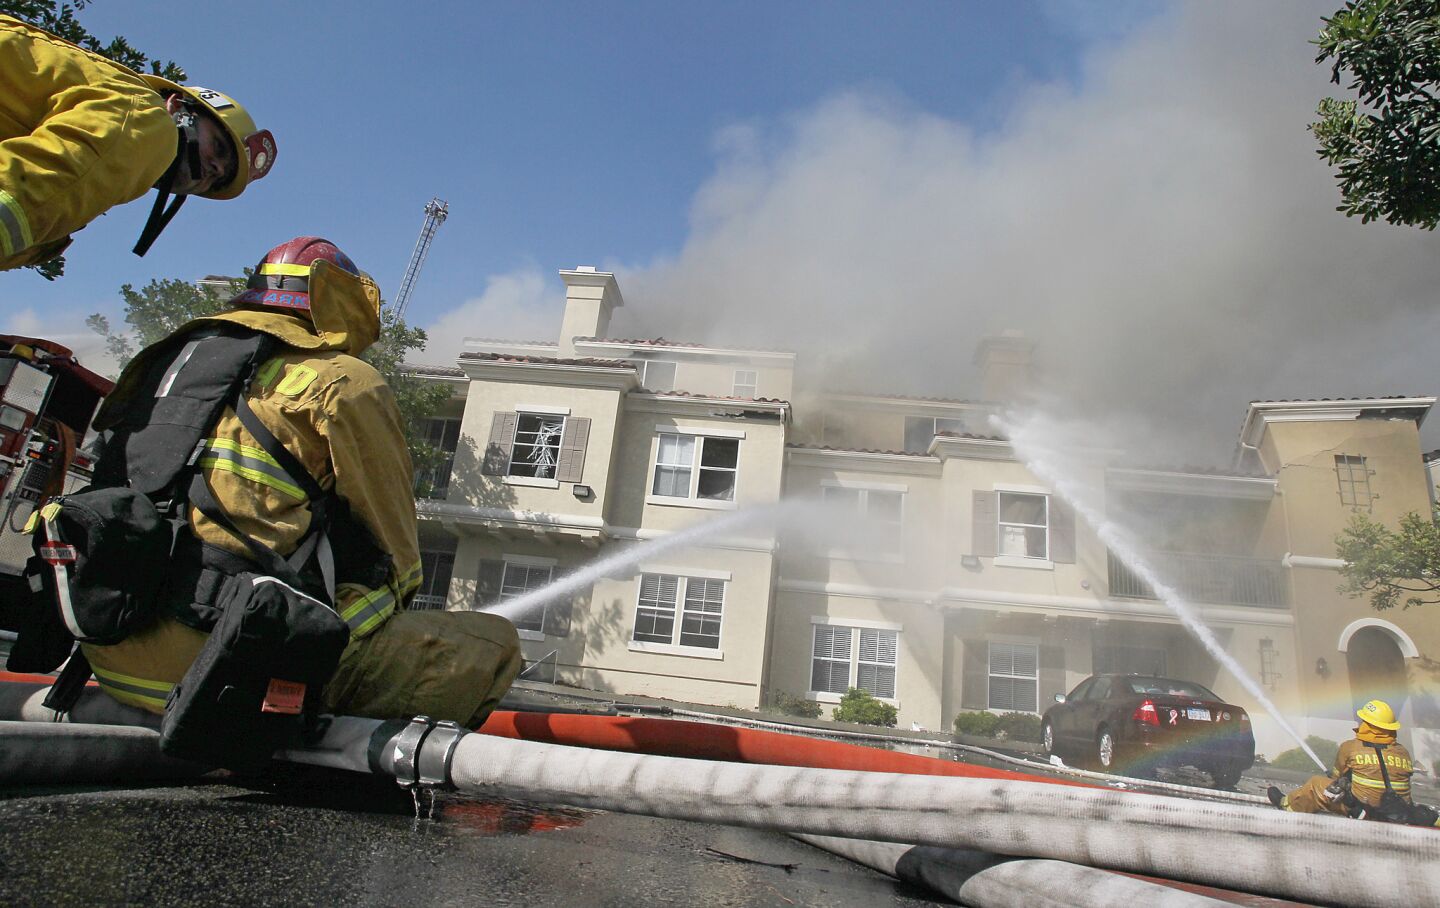 Firefighters pour water onto the Ambrosia apartment complex to keep flames from spreading to other structures.